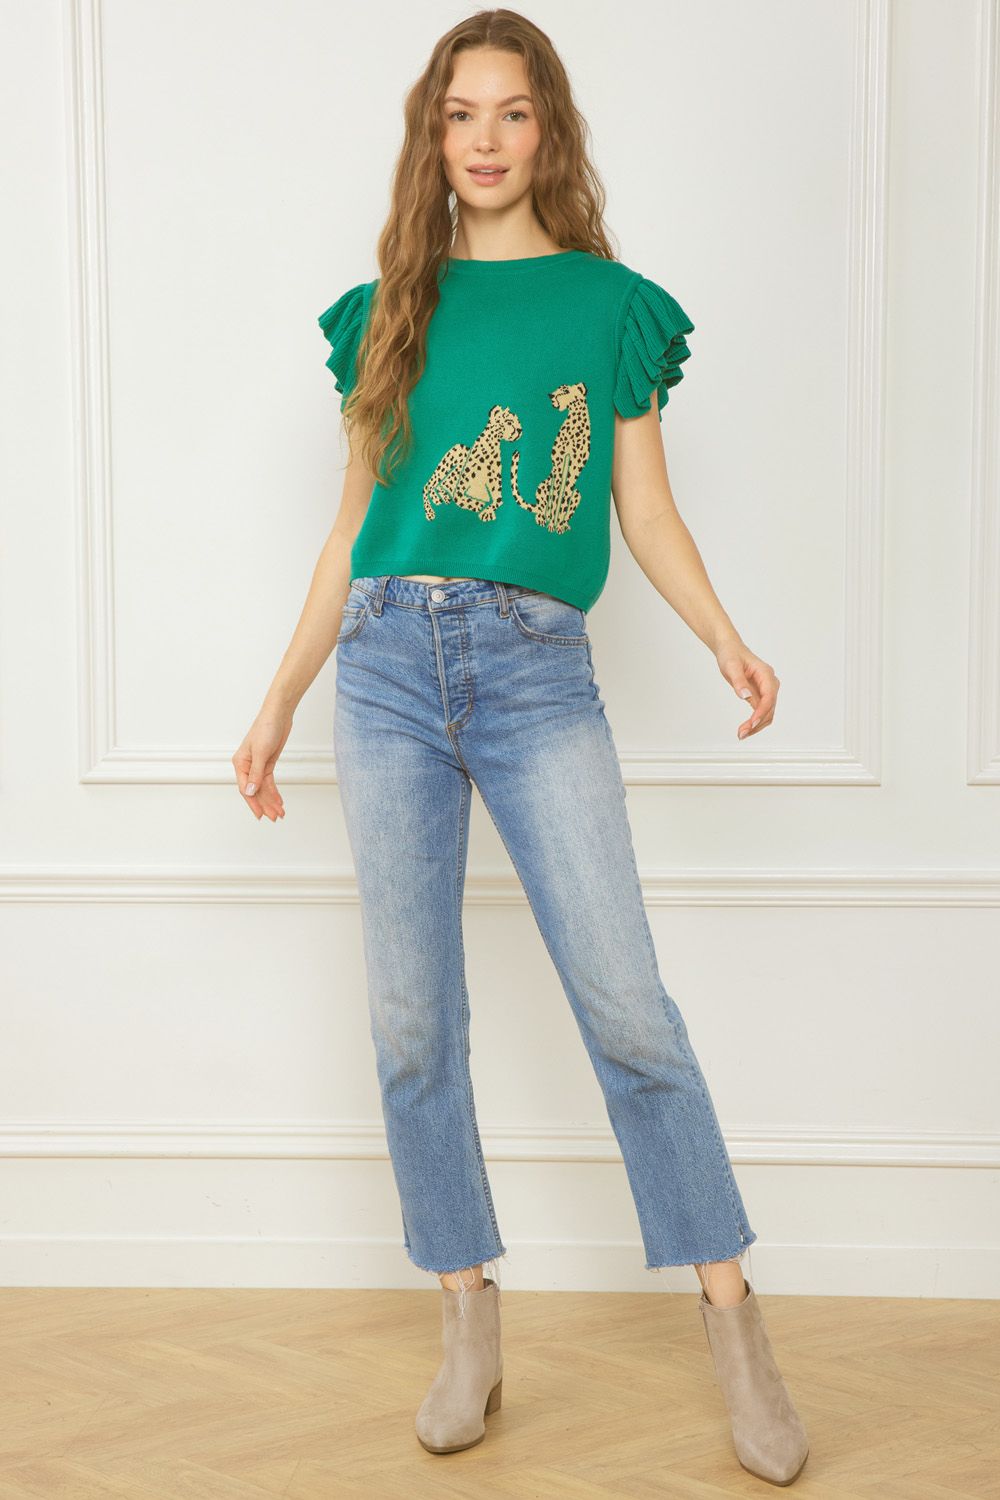 Can't Be Tamed Green Ruffle Sleeve Crop Top